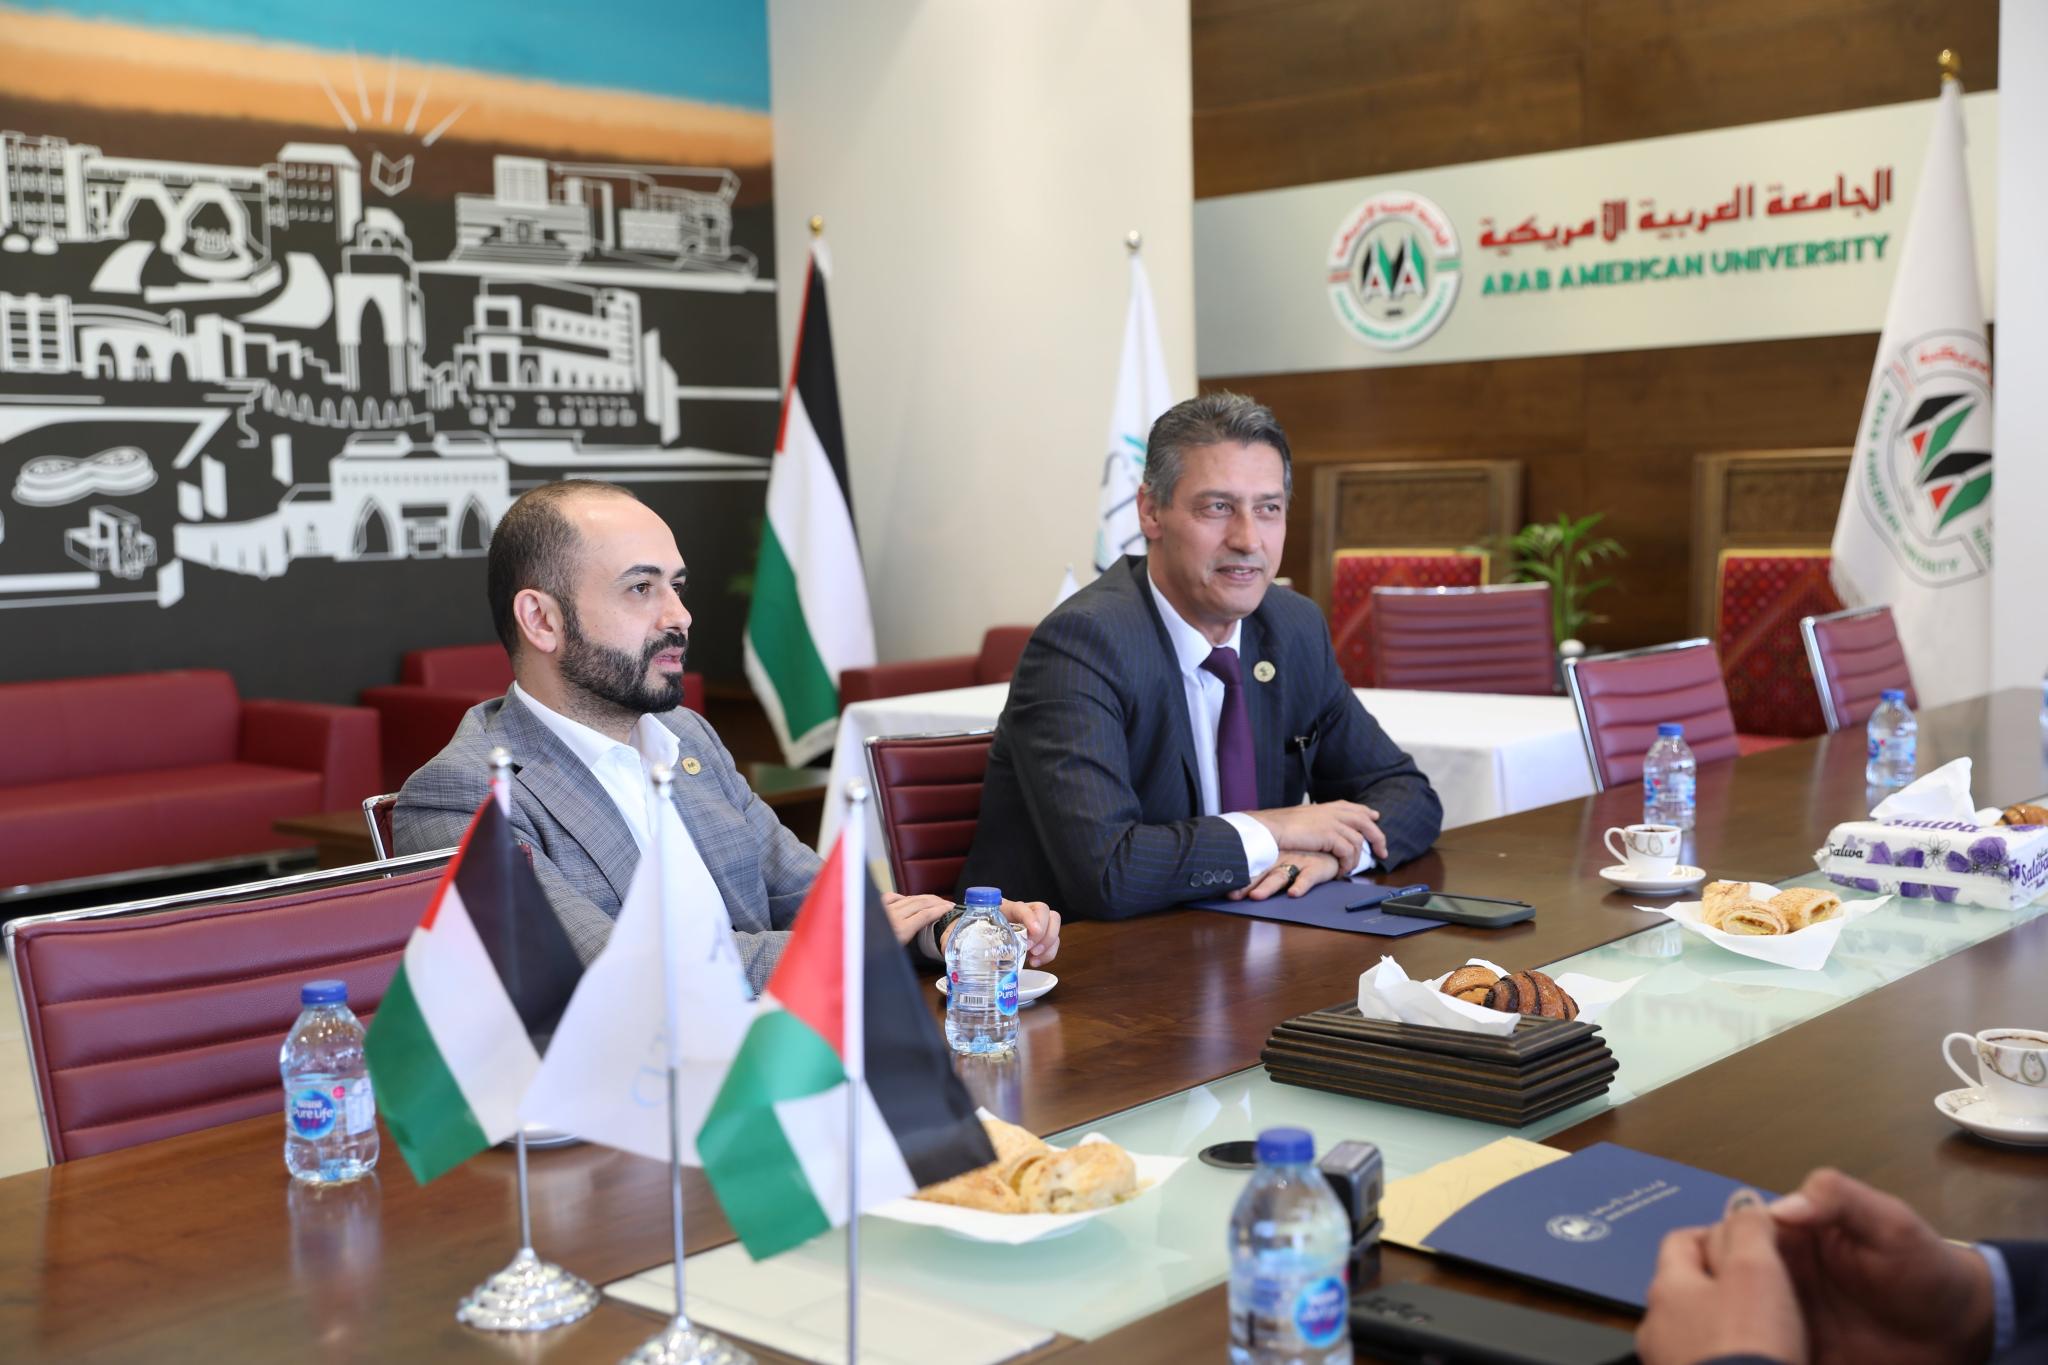 The Arab American University Signs a Cooperation Agreement with ASTEMIED Company for Medical and Hearing Solutions